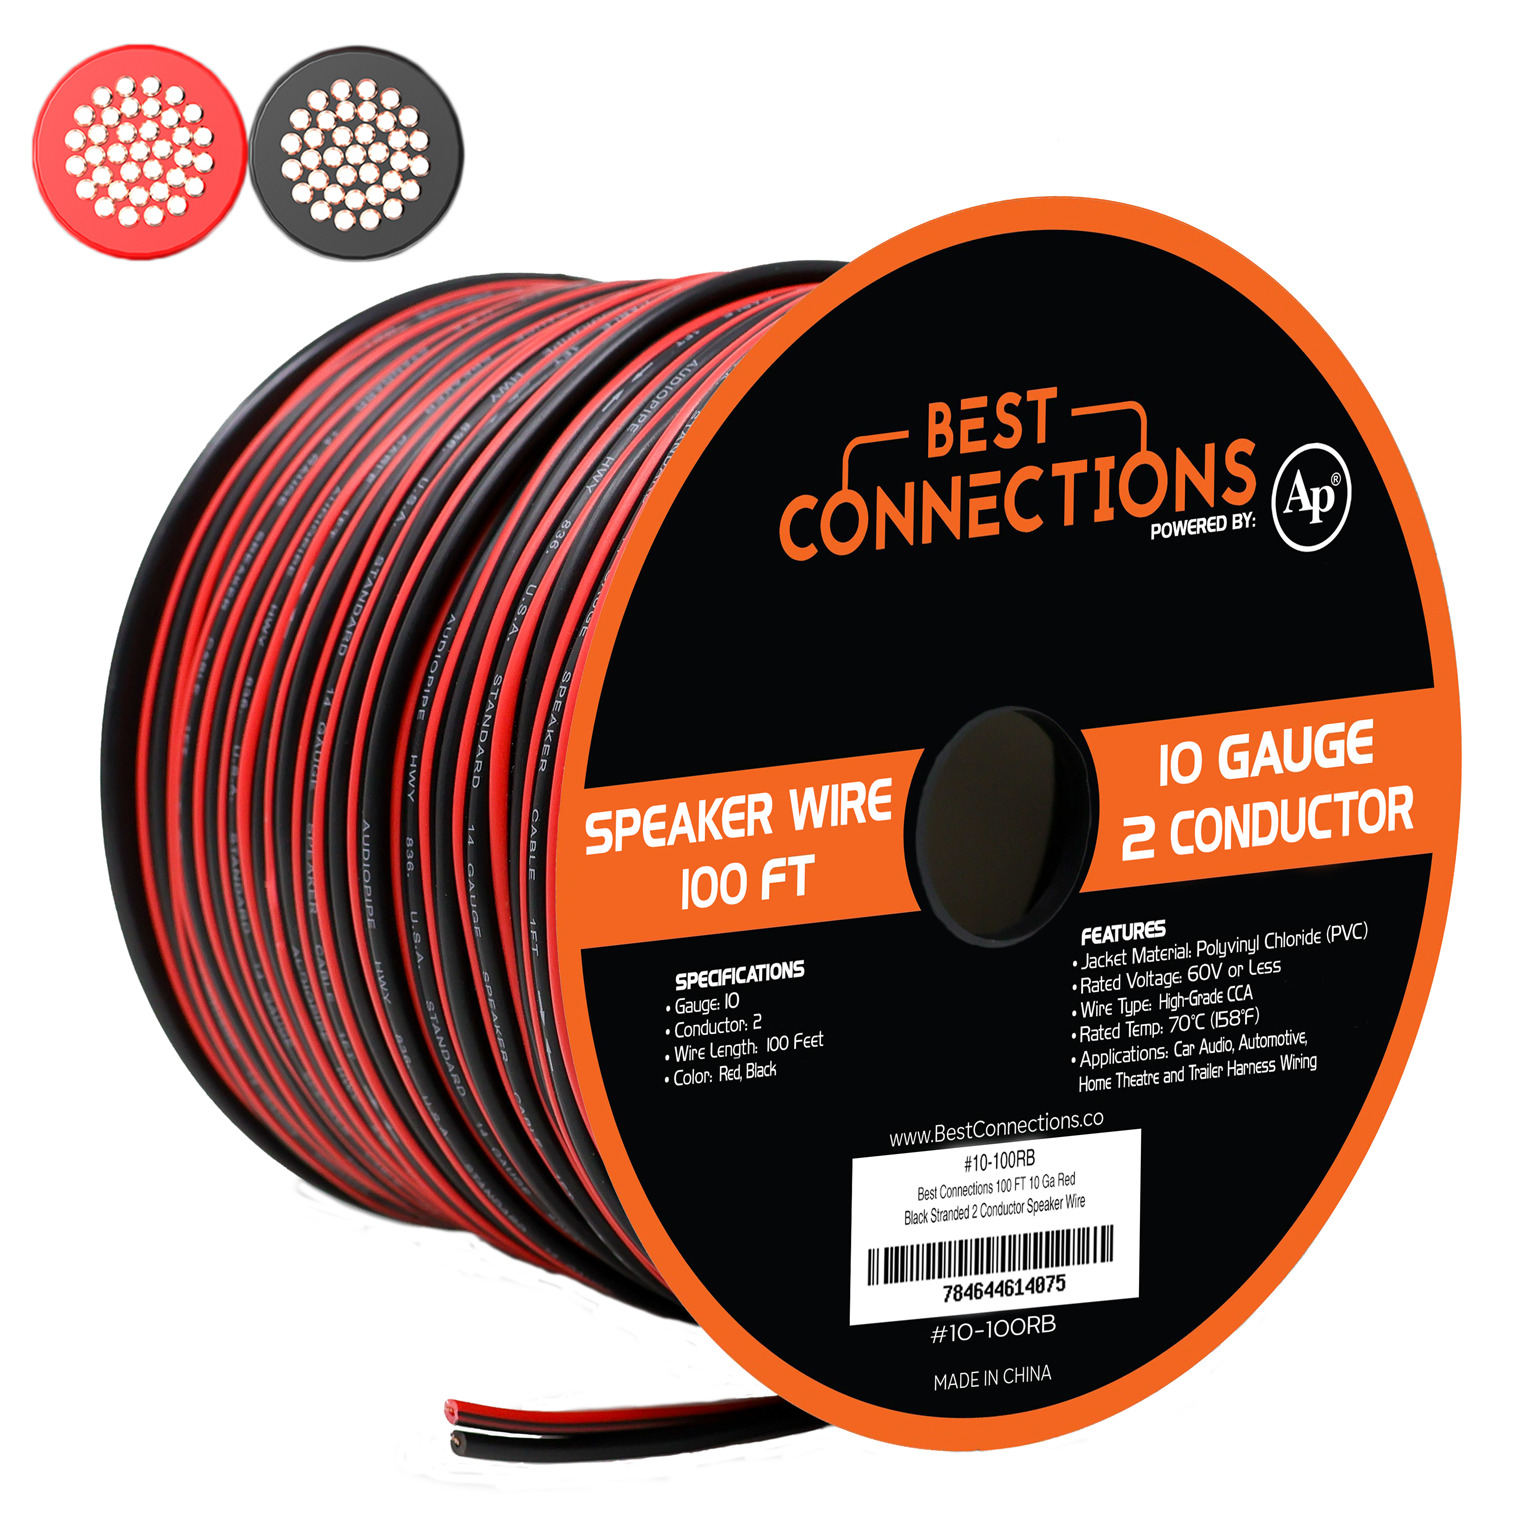 10 Gauge Speaker Wire 100 Feet Red-Black CCA 2 Conductor Car Audio Home Theater